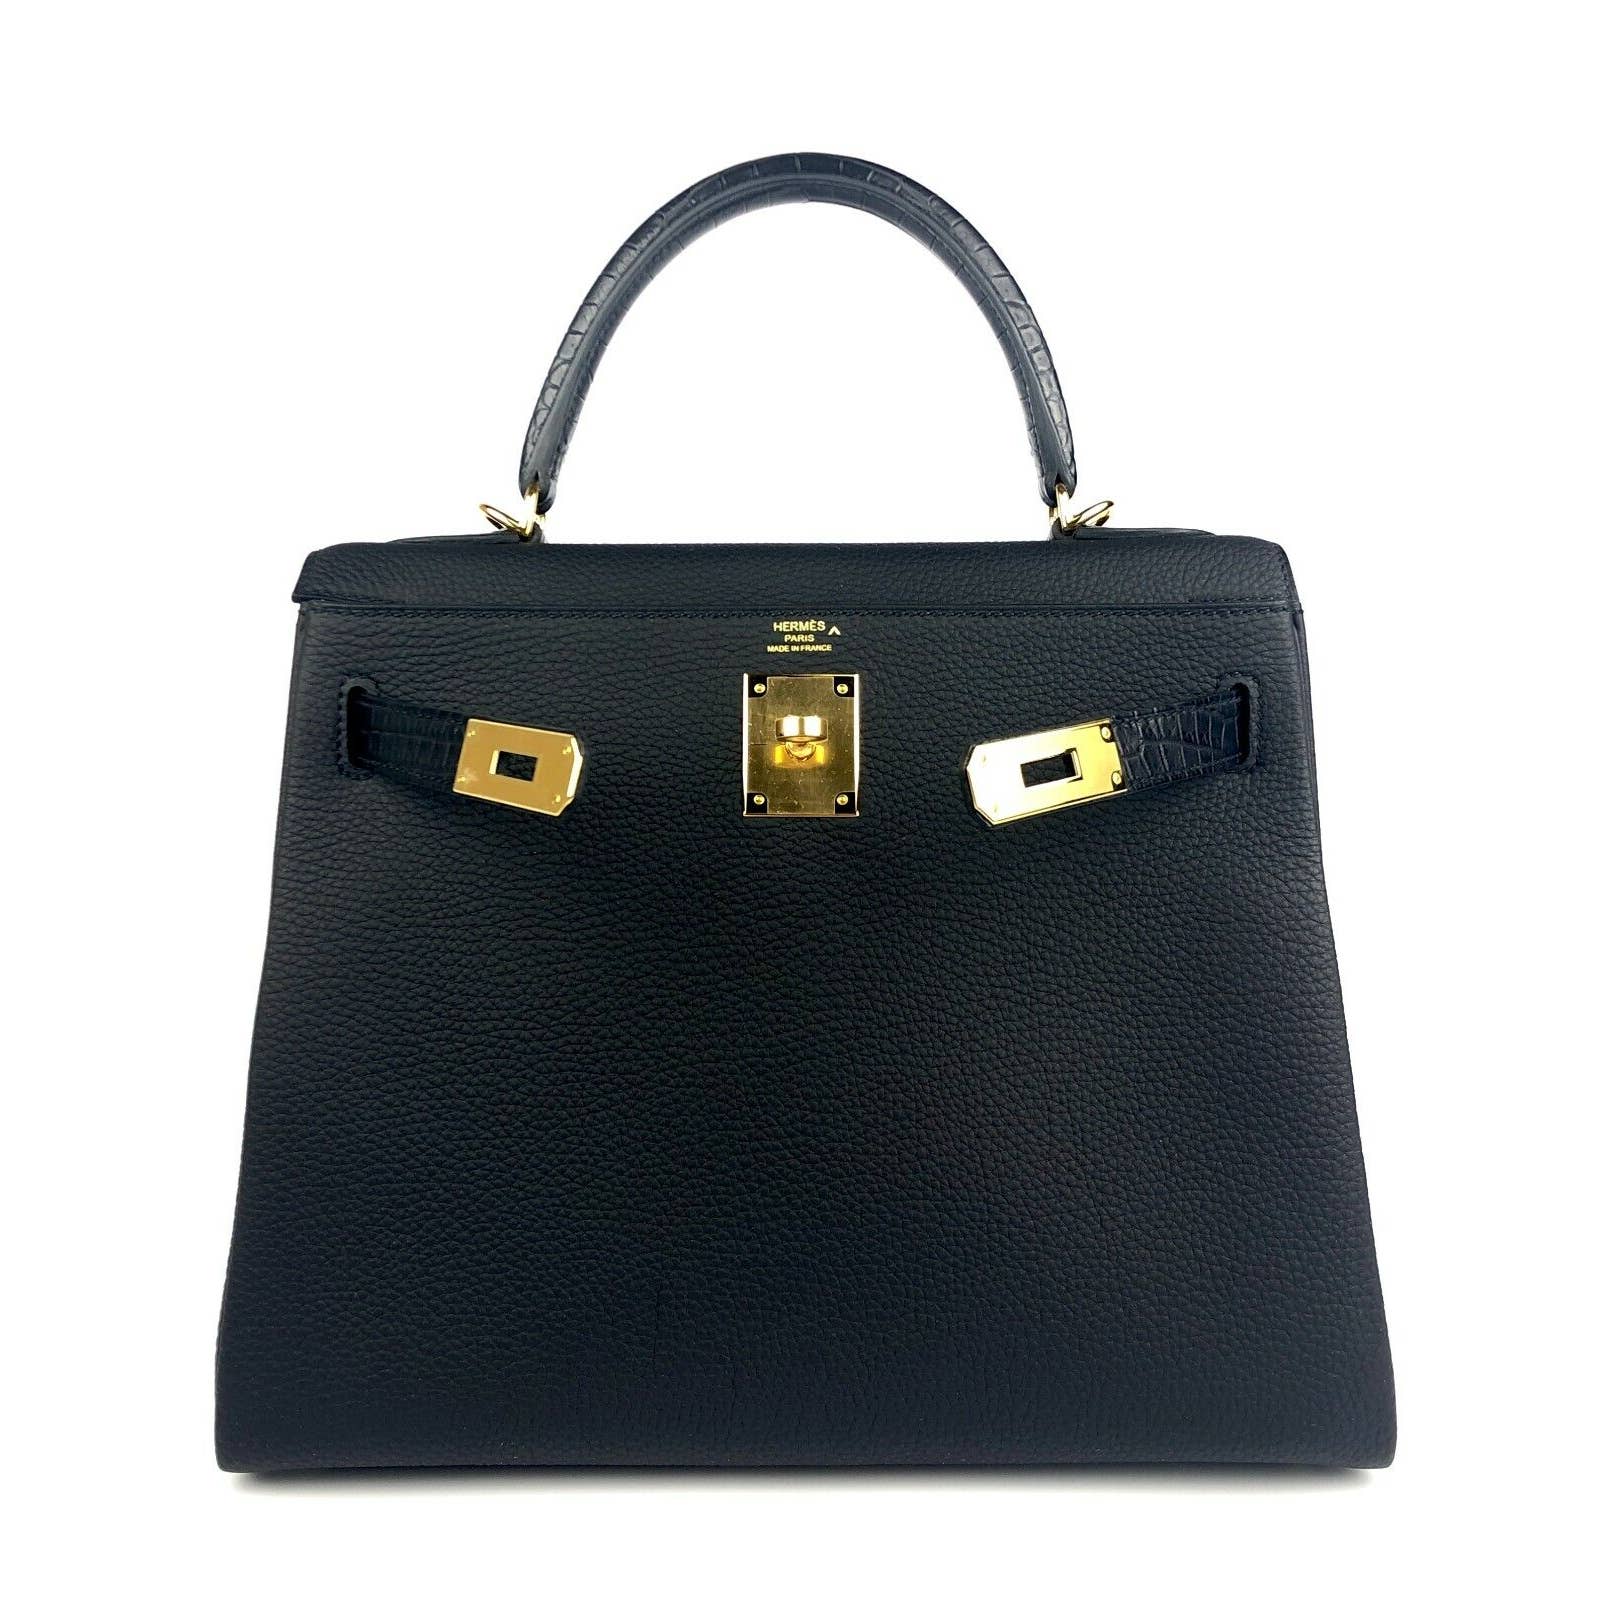 Hermes Kelly 28 Touch Black Leather and Matte Alligator